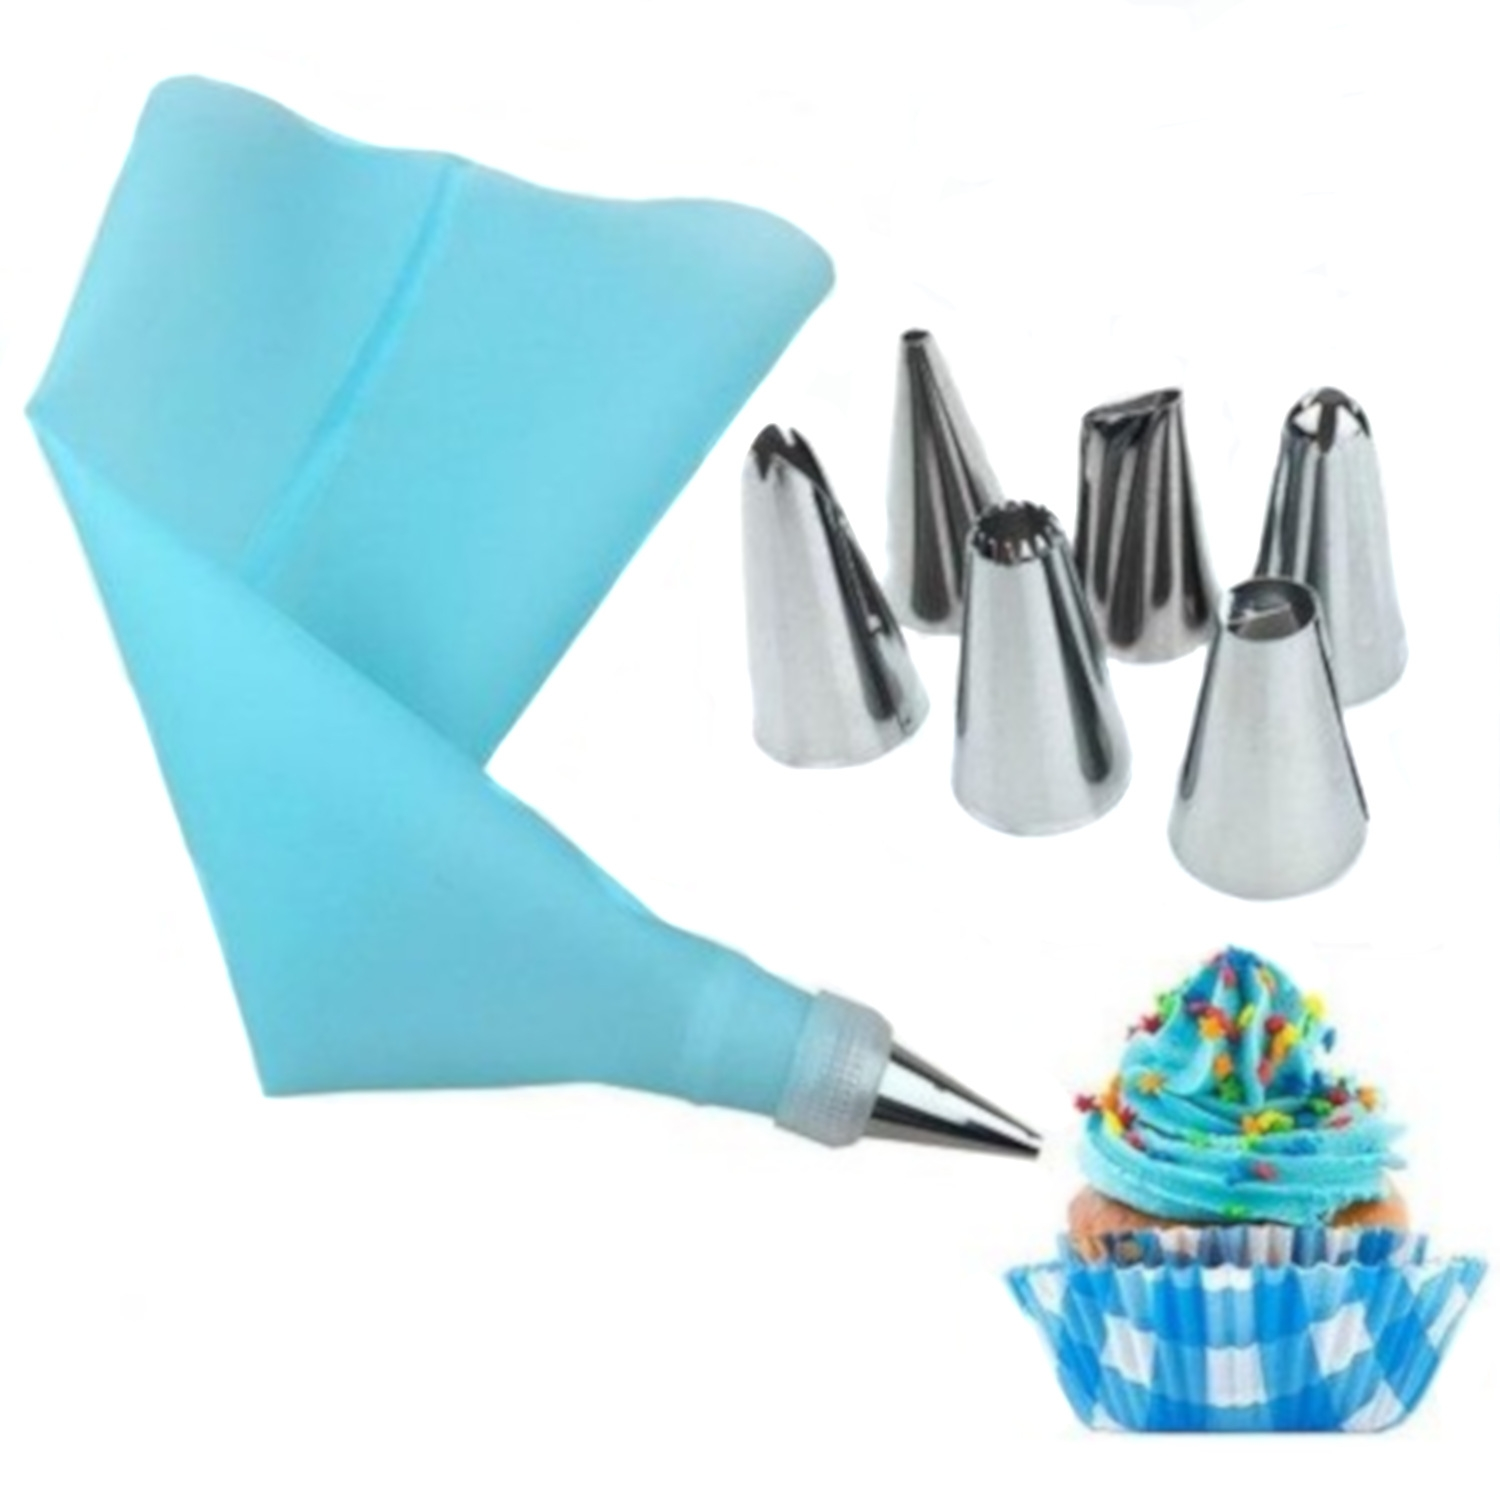 Vegetable Peeler Along With 6 Stainless Steel Nozzles With Pastry Bag And Converter